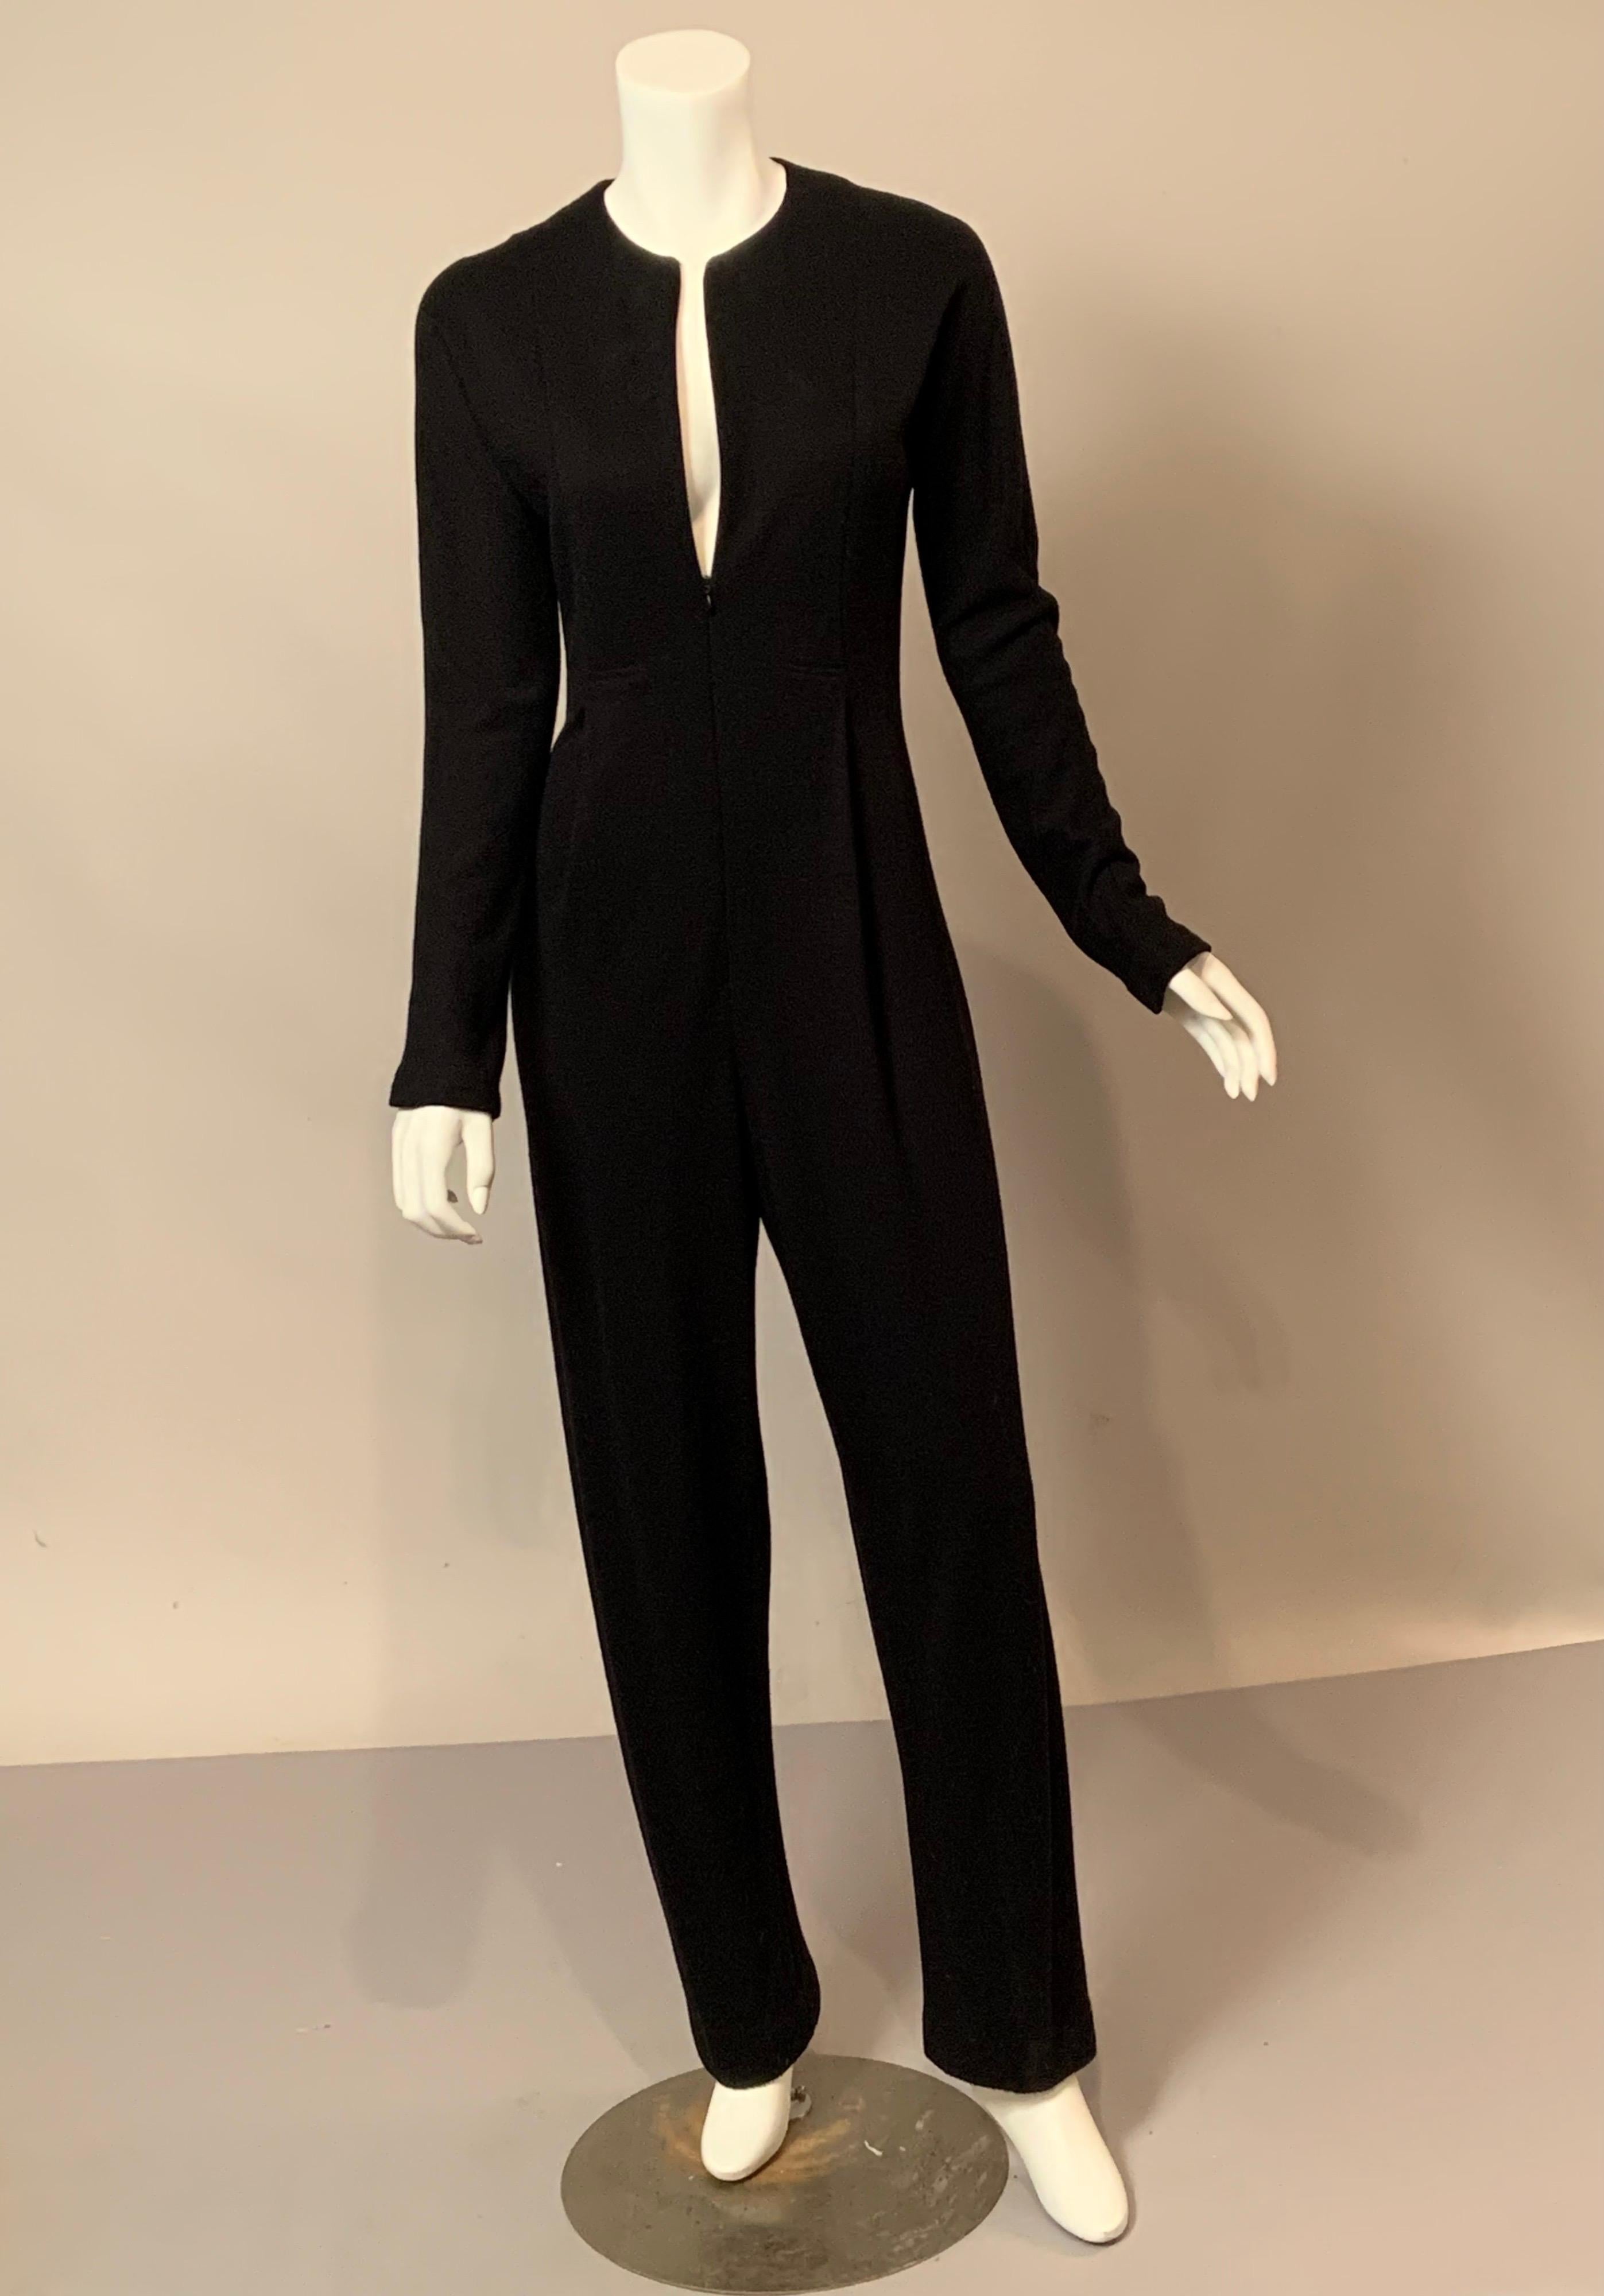 The clean spare lines of this Geoffrey Beene black wool jumpsuit are so evocative of the style of Mr. Beene.   The collarless jumpsuit has a deep center front zipper taking it from day to evening in a second.  There is a stitched down pleat on